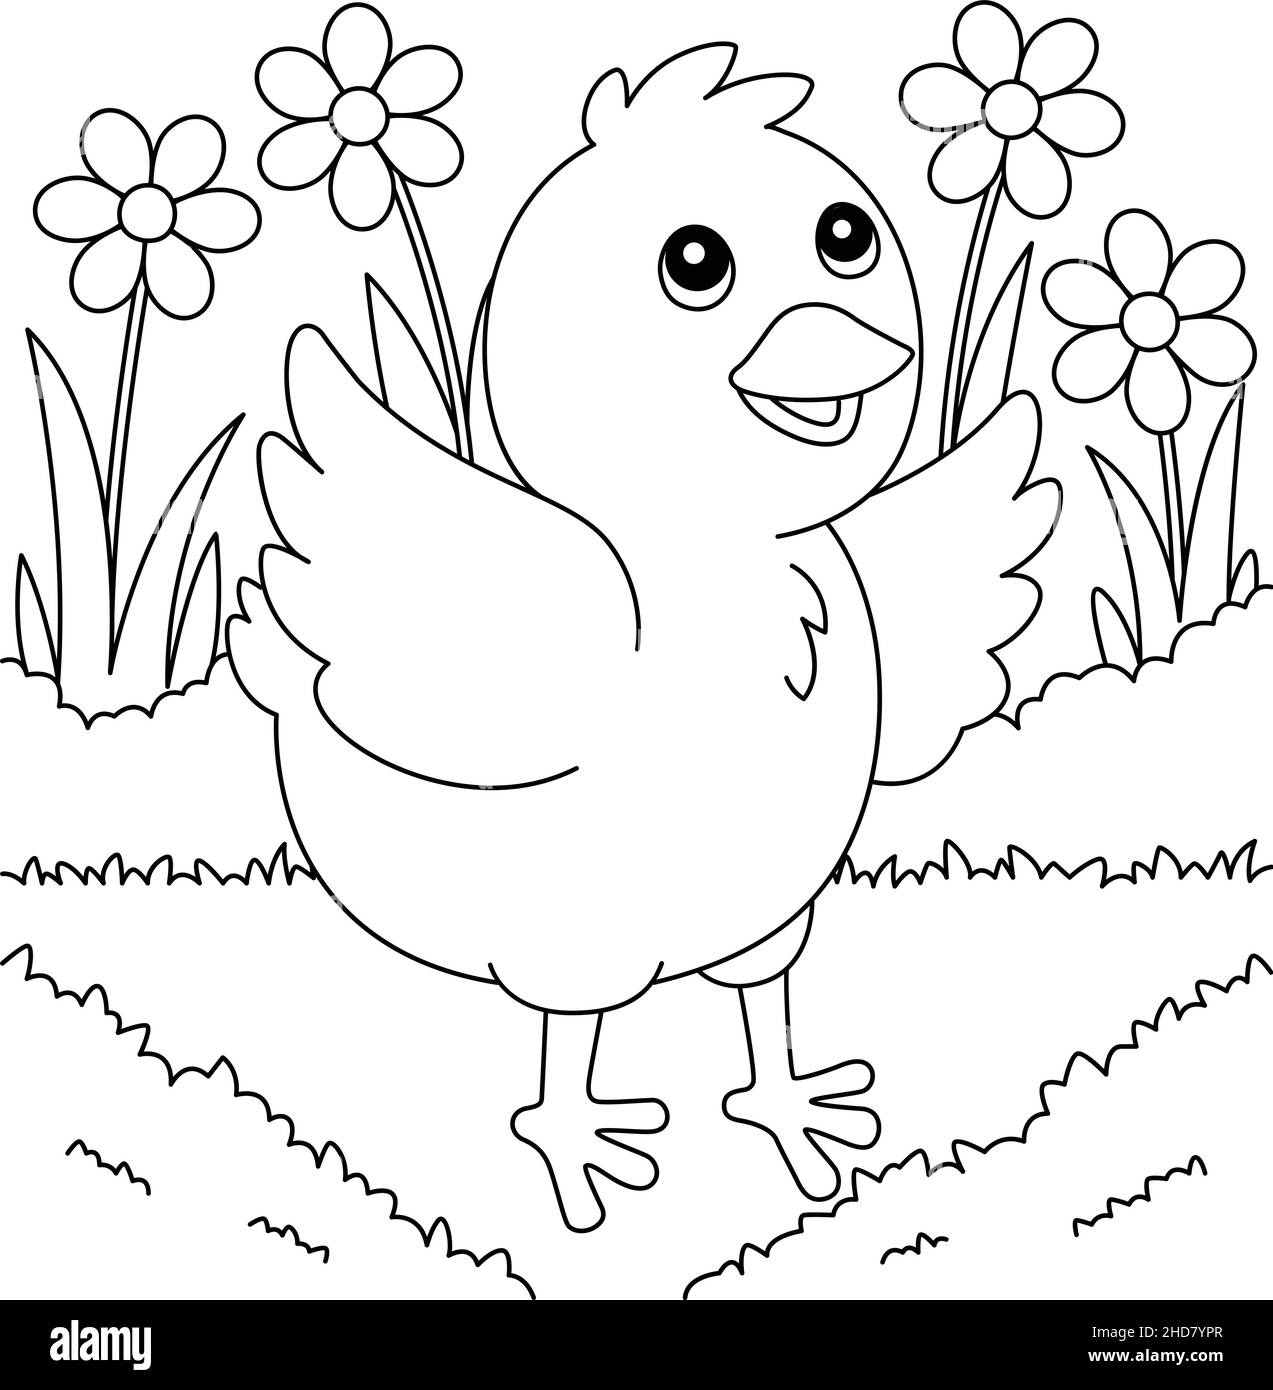 Chick Coloring Page for Kids Stock Vector Image & Art - Alamy